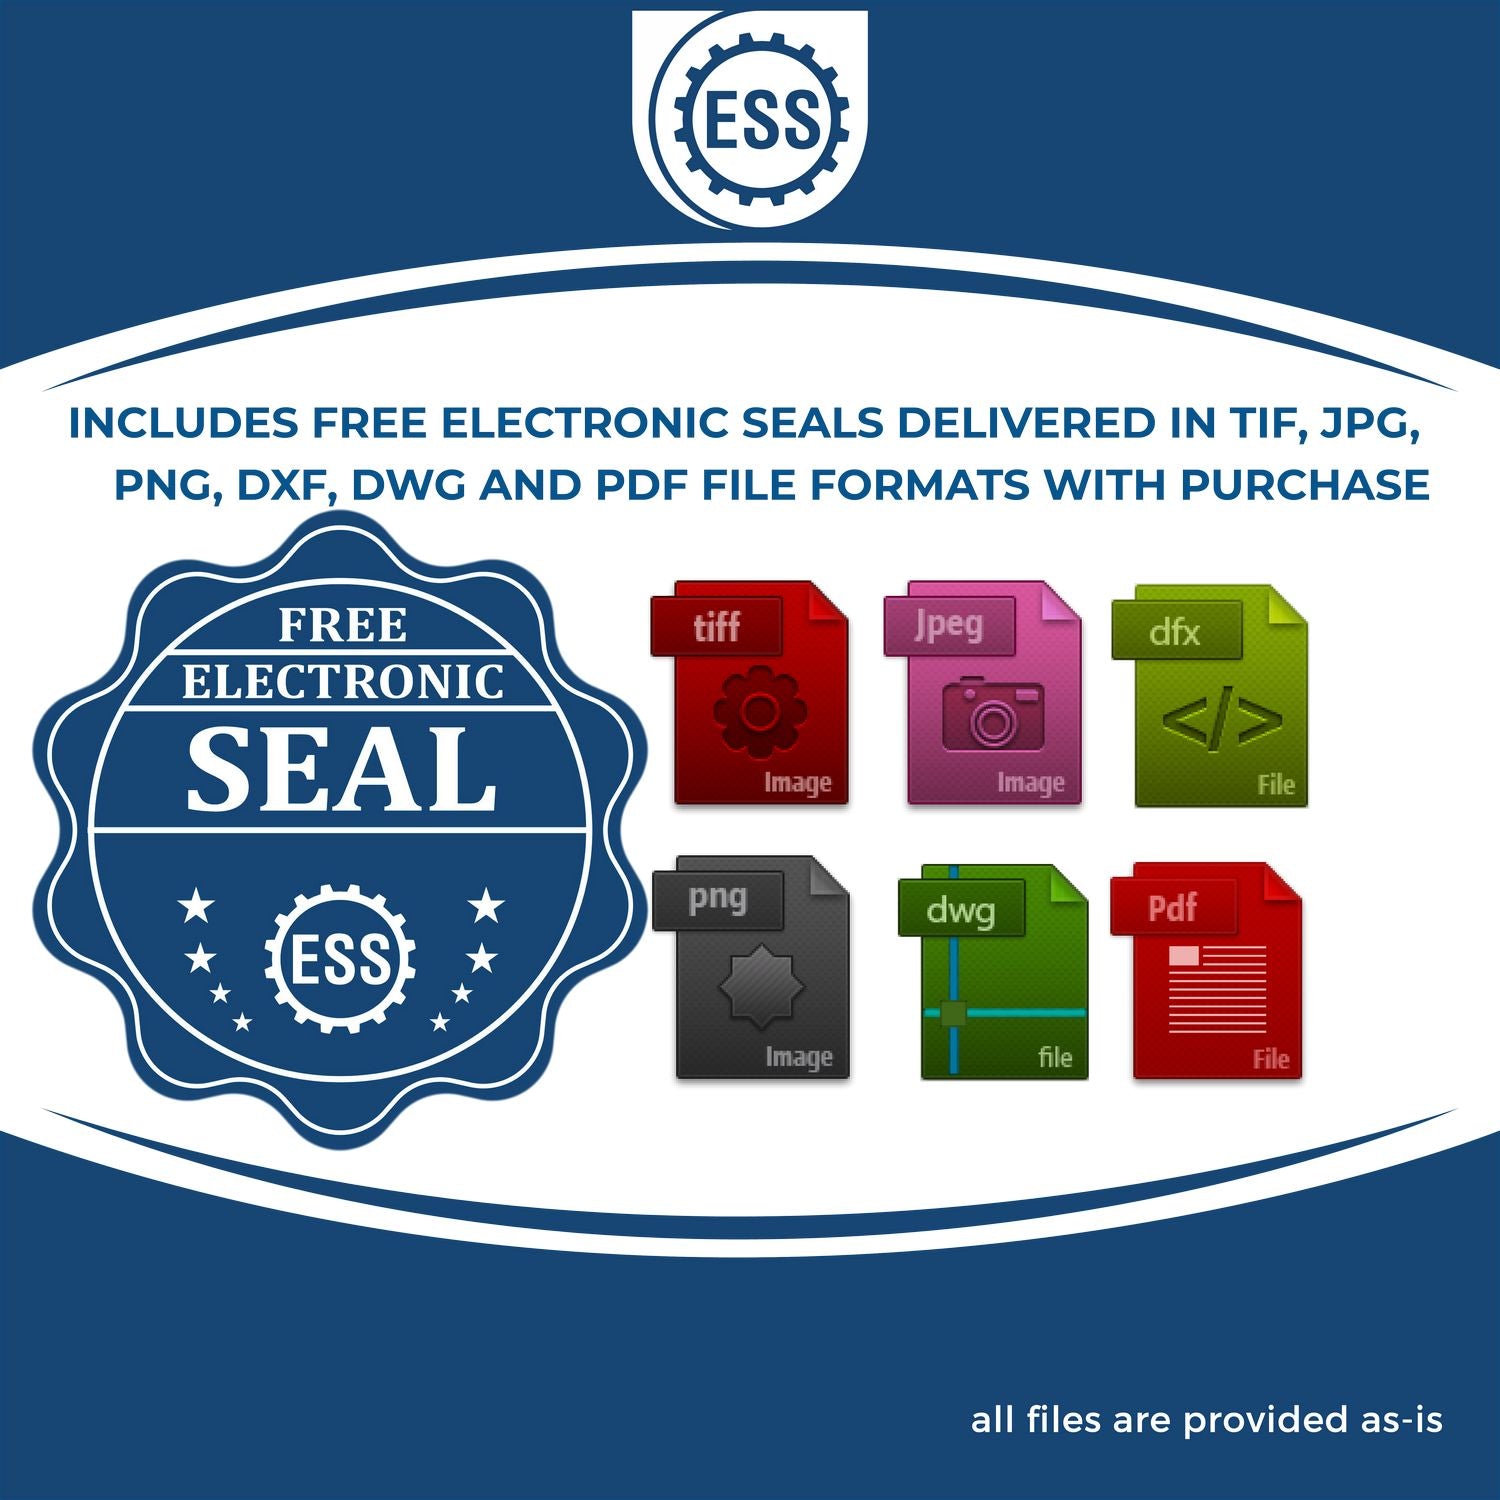 An infographic for the free electronic seal for the Self-Inking New Mexico PE Stamp illustrating the different file type icons such as DXF, DWG, TIF, JPG and PNG.